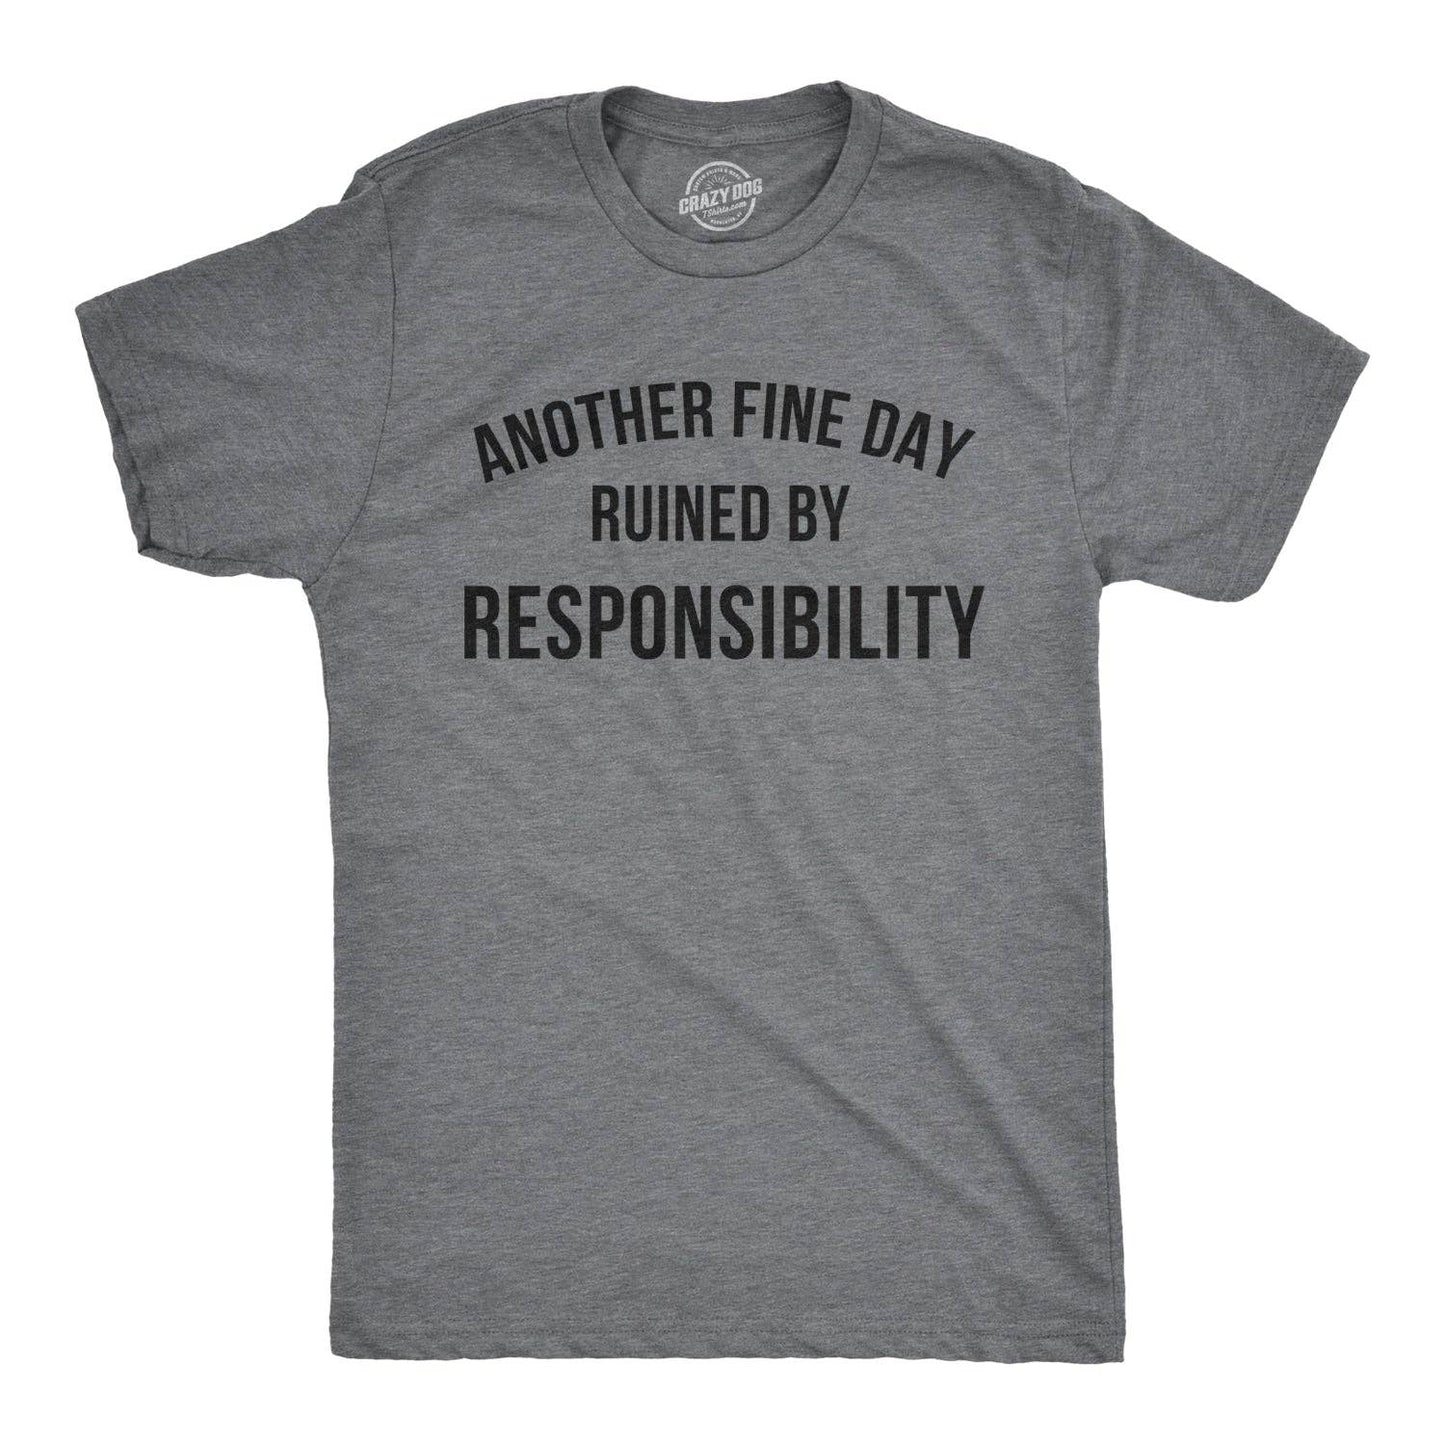 Another Fine Day Ruined By Responsibility Funny Graphic Tee - WOMEN